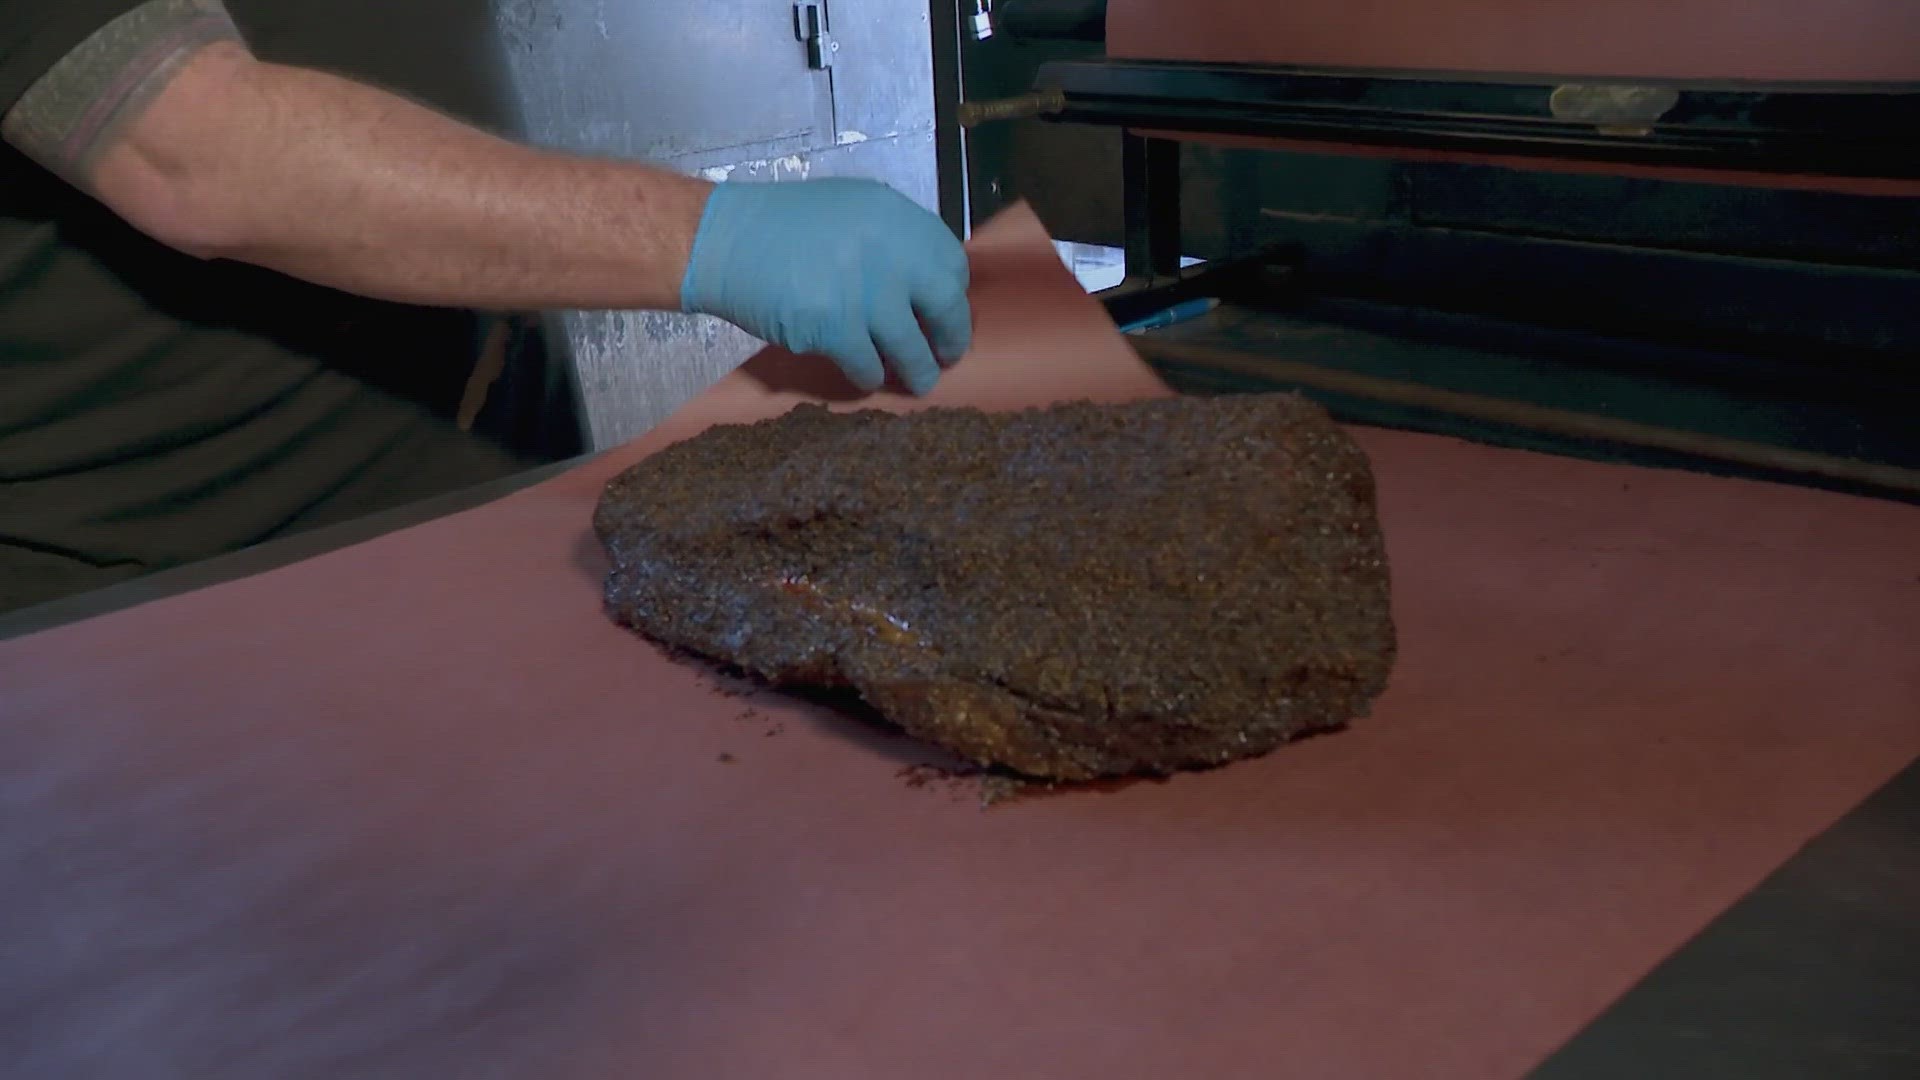 The prices at local restaurants and grocery stores will be tough to swallow for brisket lovers.